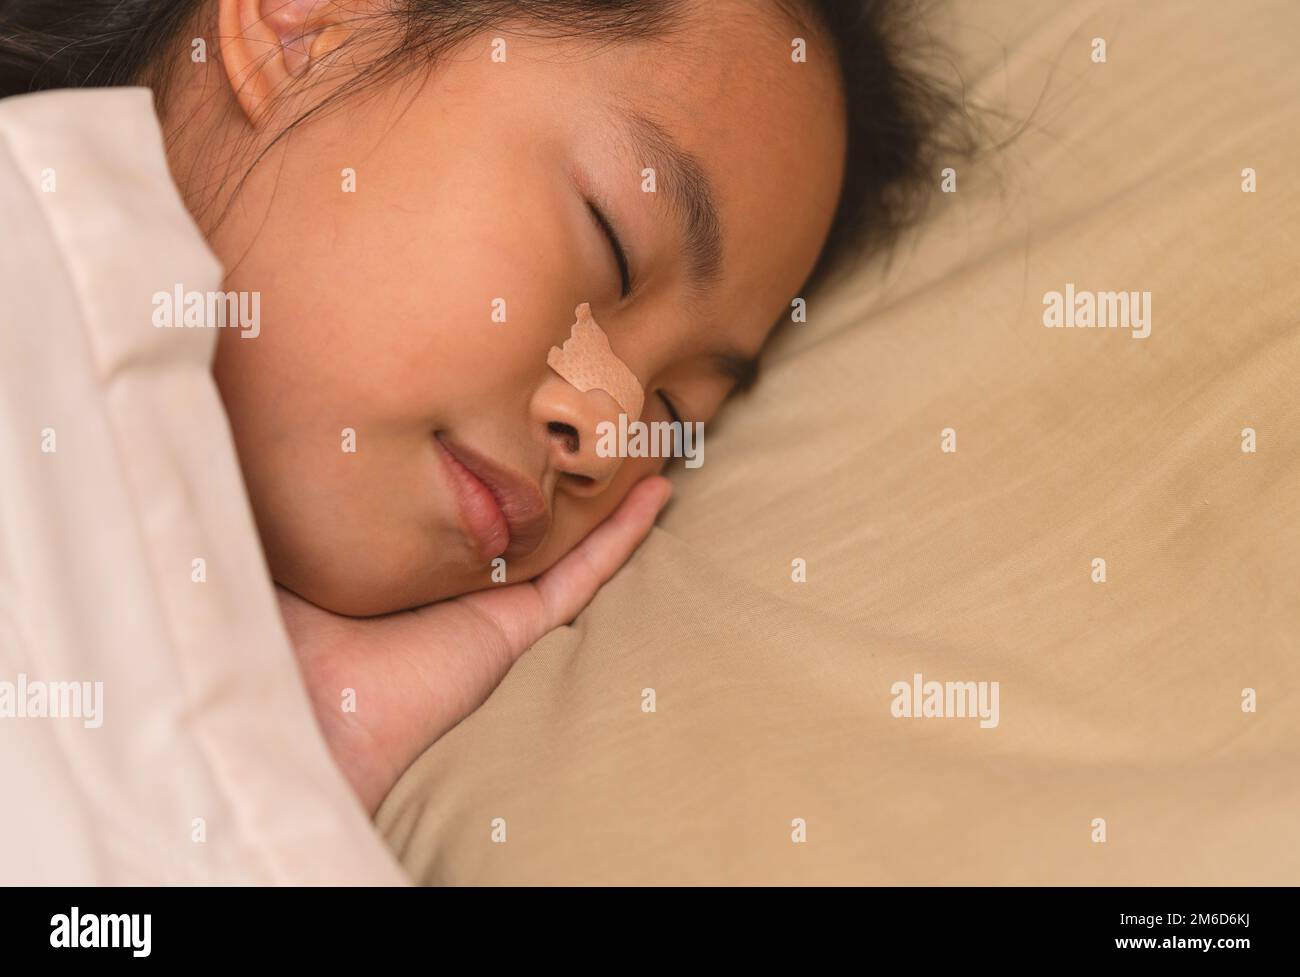 Asian child girl is sleeping well in bed, close up to the side of her face on pillow, nasal strip at her nose. Asian child girl at 8 or 9 years old. B Stock Photo